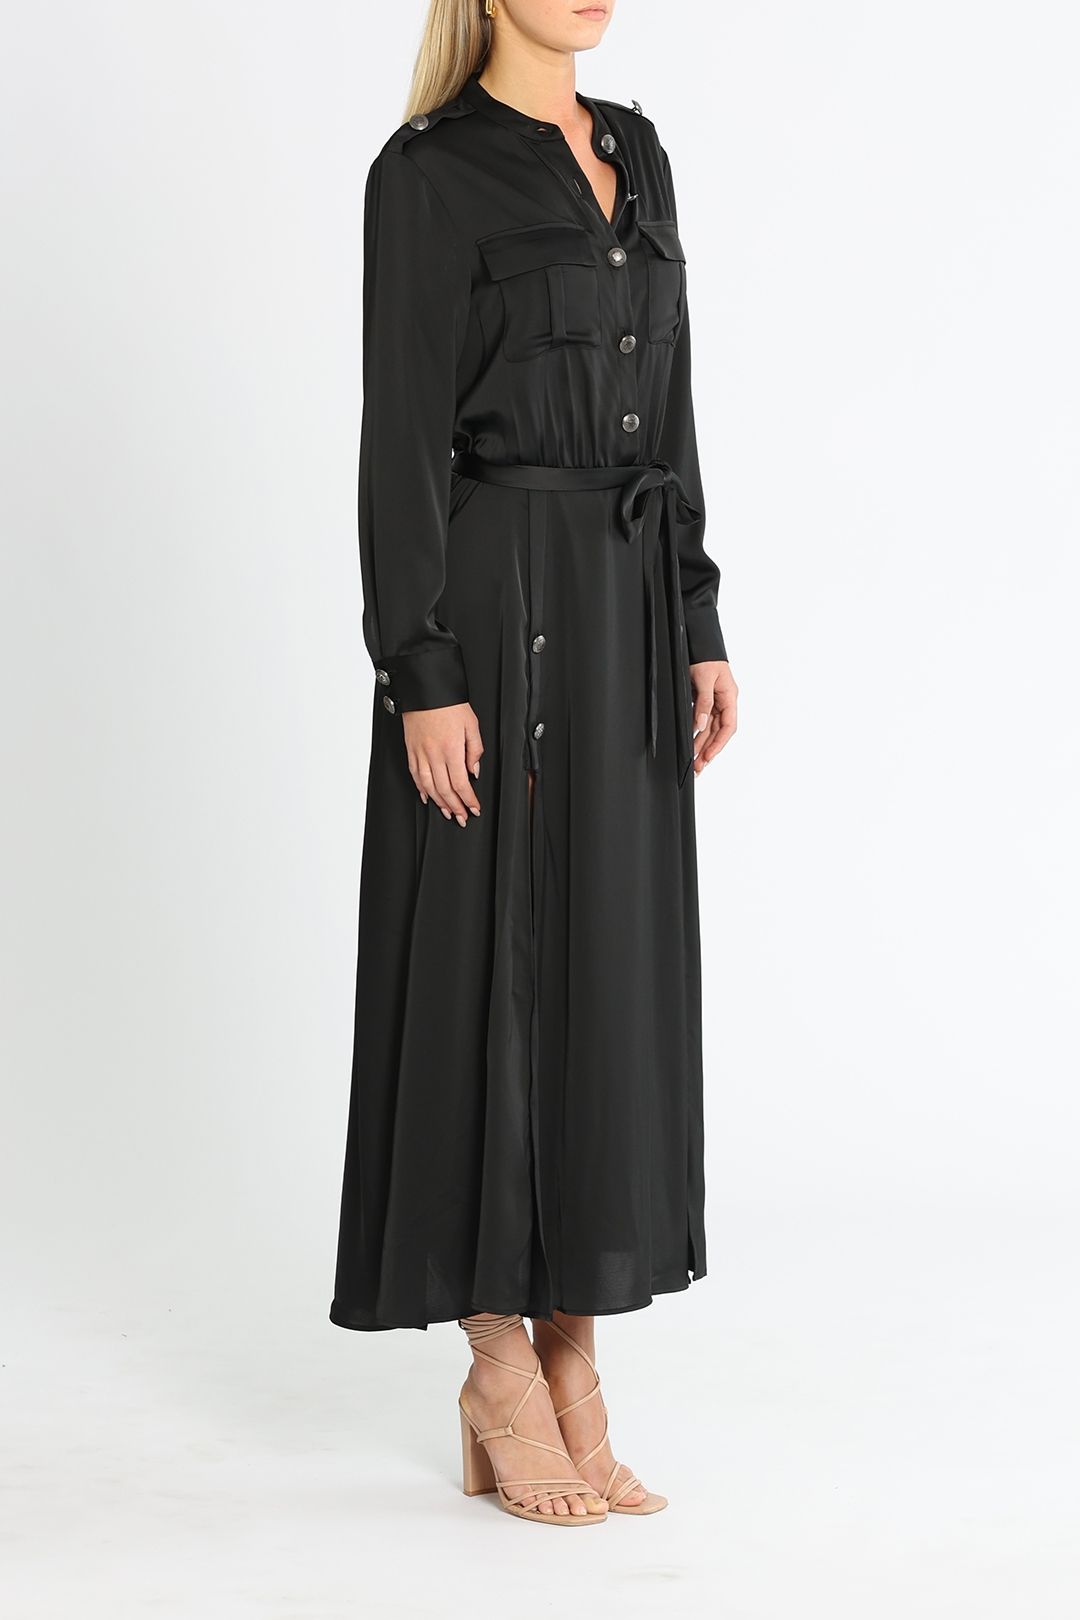 Belle and Bloom Lover To Lover Maxi Shirt Dress Black Waist Tie